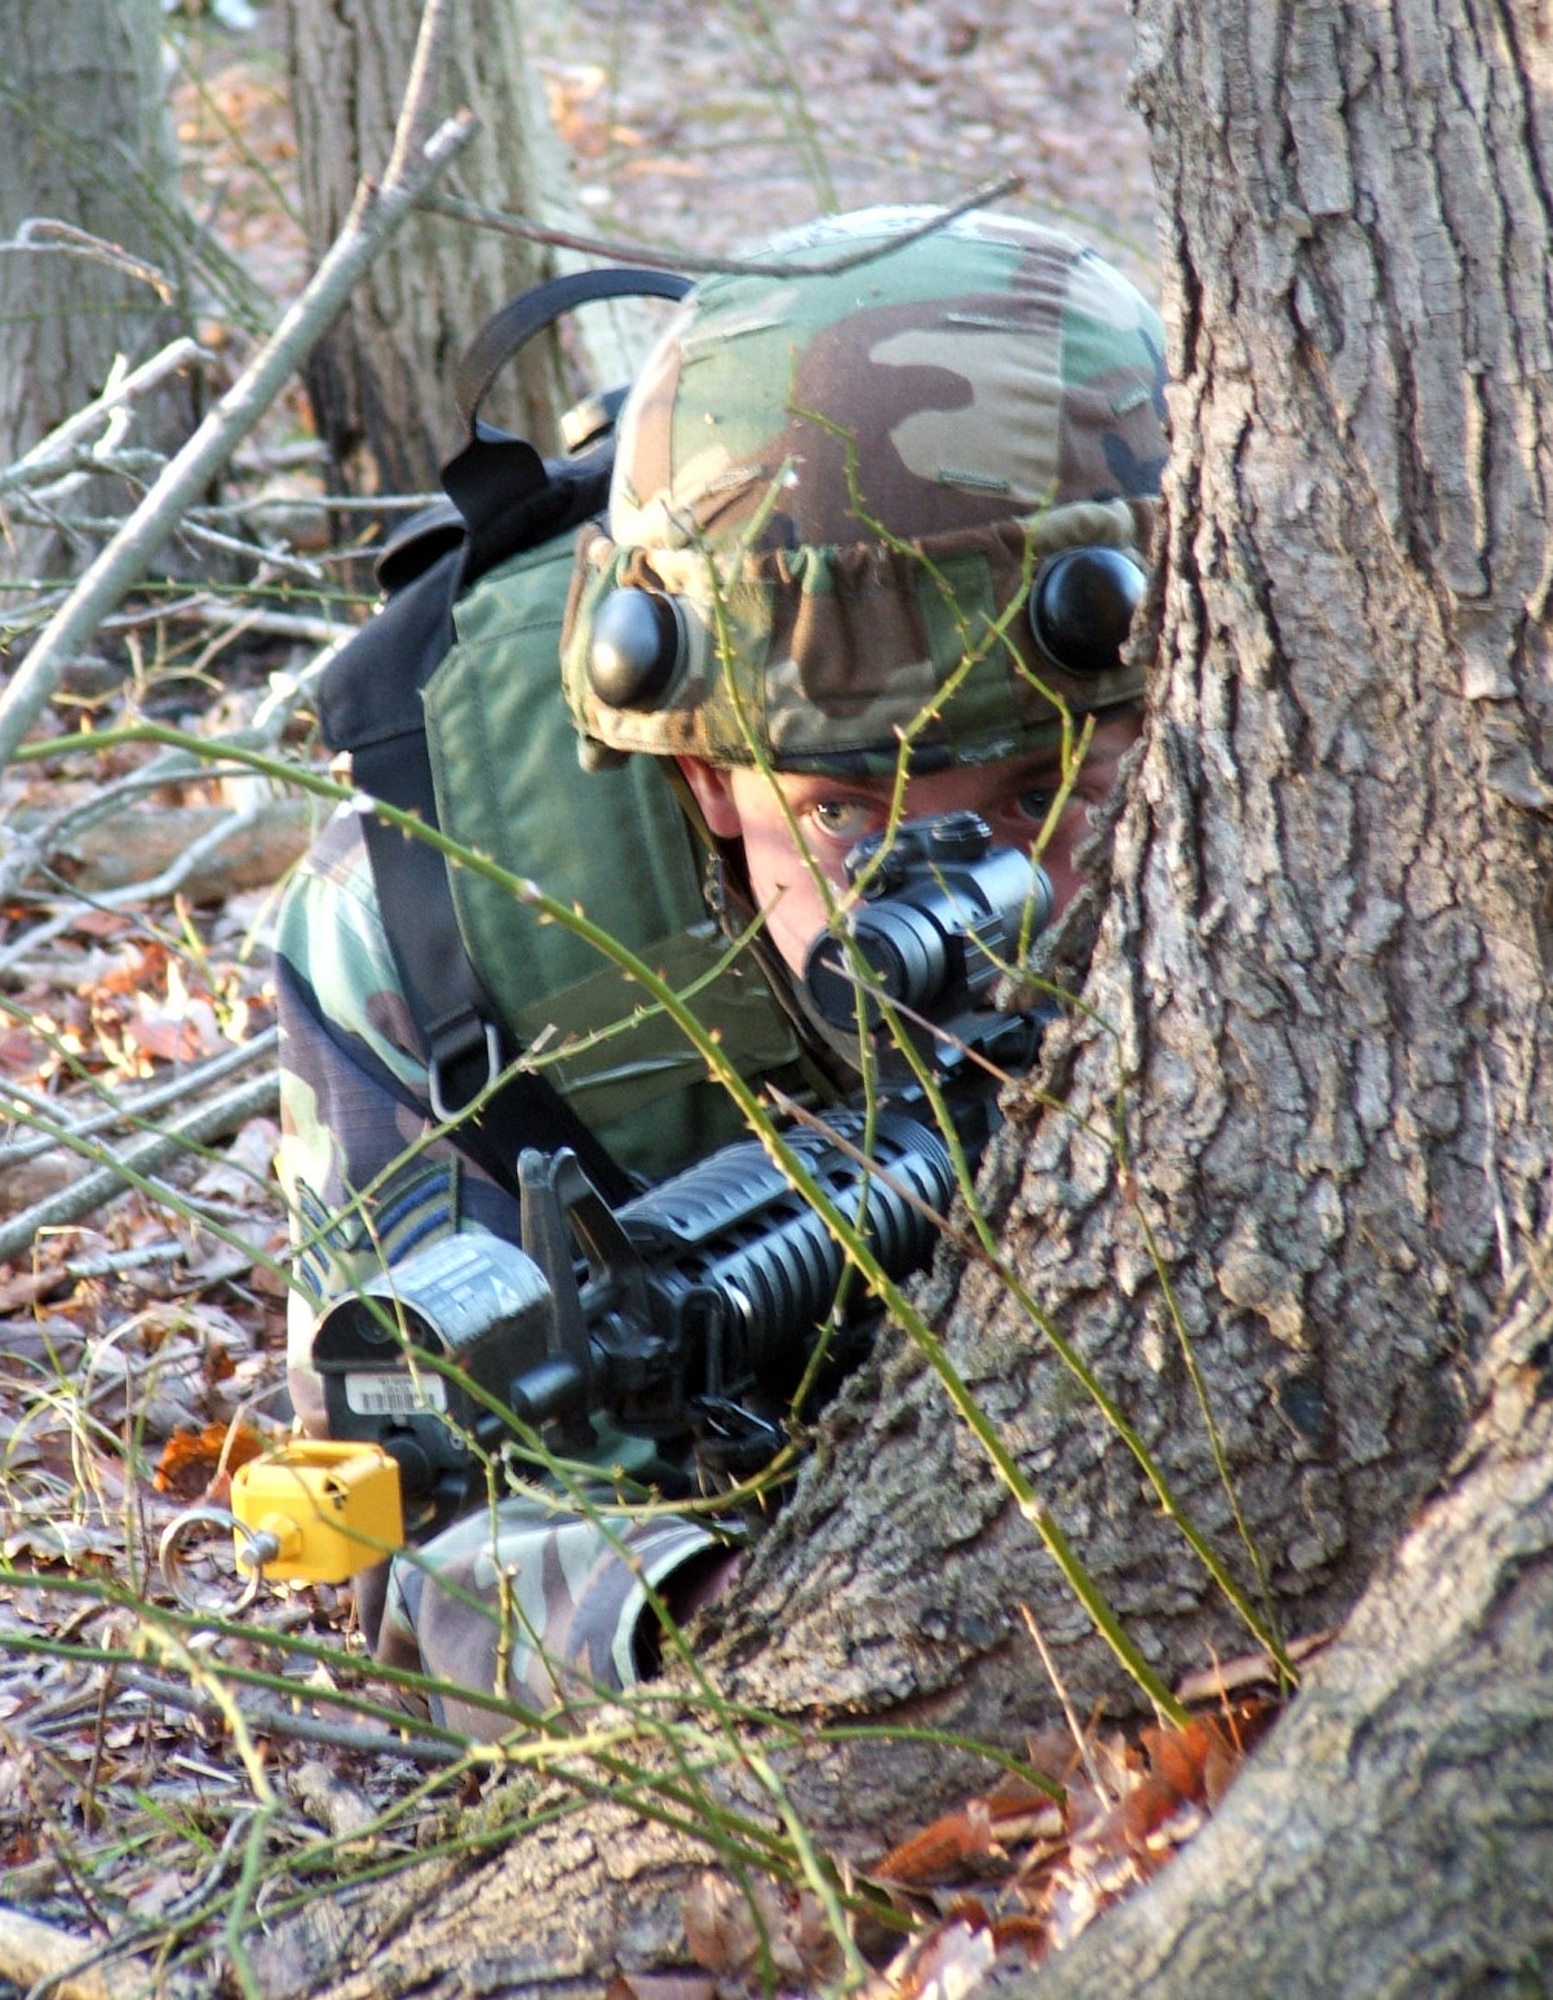 FORT DIX, N.J. (AFPN) -- An Airman participating in Air Force Integrated Contingency Skills Training Course 06-1 here takes up a position in the woods during a training session on combat patrol and tactics on a range. The CST course has more than 100 Airmen from multiple Air Force career fields participating and is taught by the Air Mobility Warfare Center's 421st Combat Training Squadron. The training teaches Airmen everything from combat tactics and patrolling to convoy operations and combat first aid. (U.S. Air Force photo by Tech. Sgt. Scott T. Sturkol)